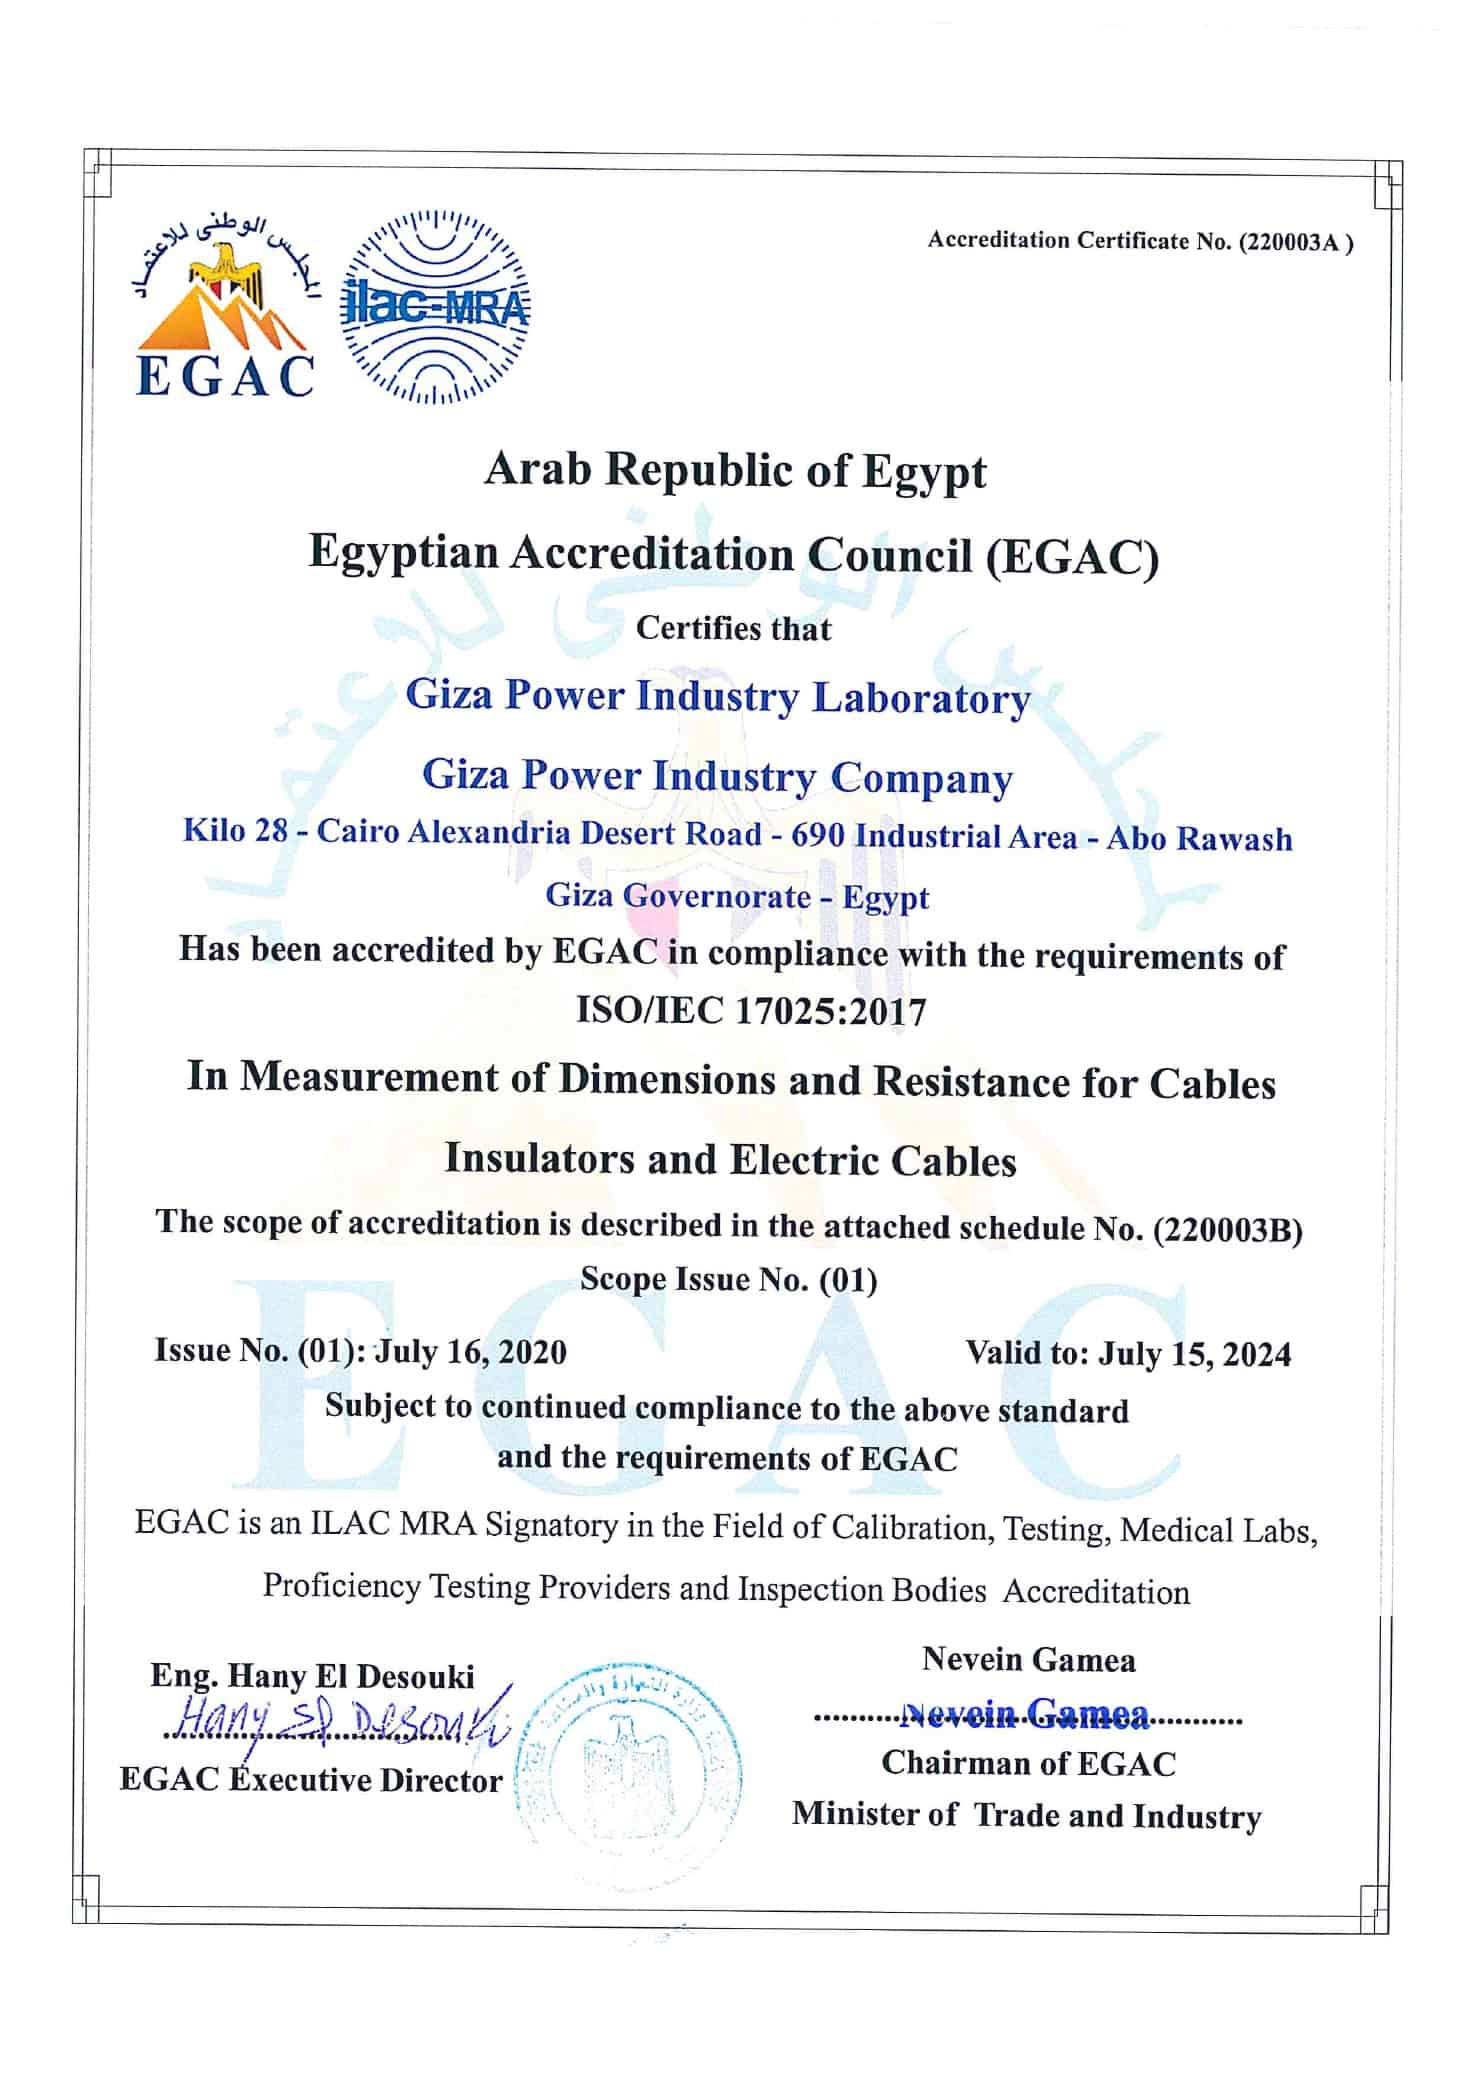 Giza Power Industry certificate